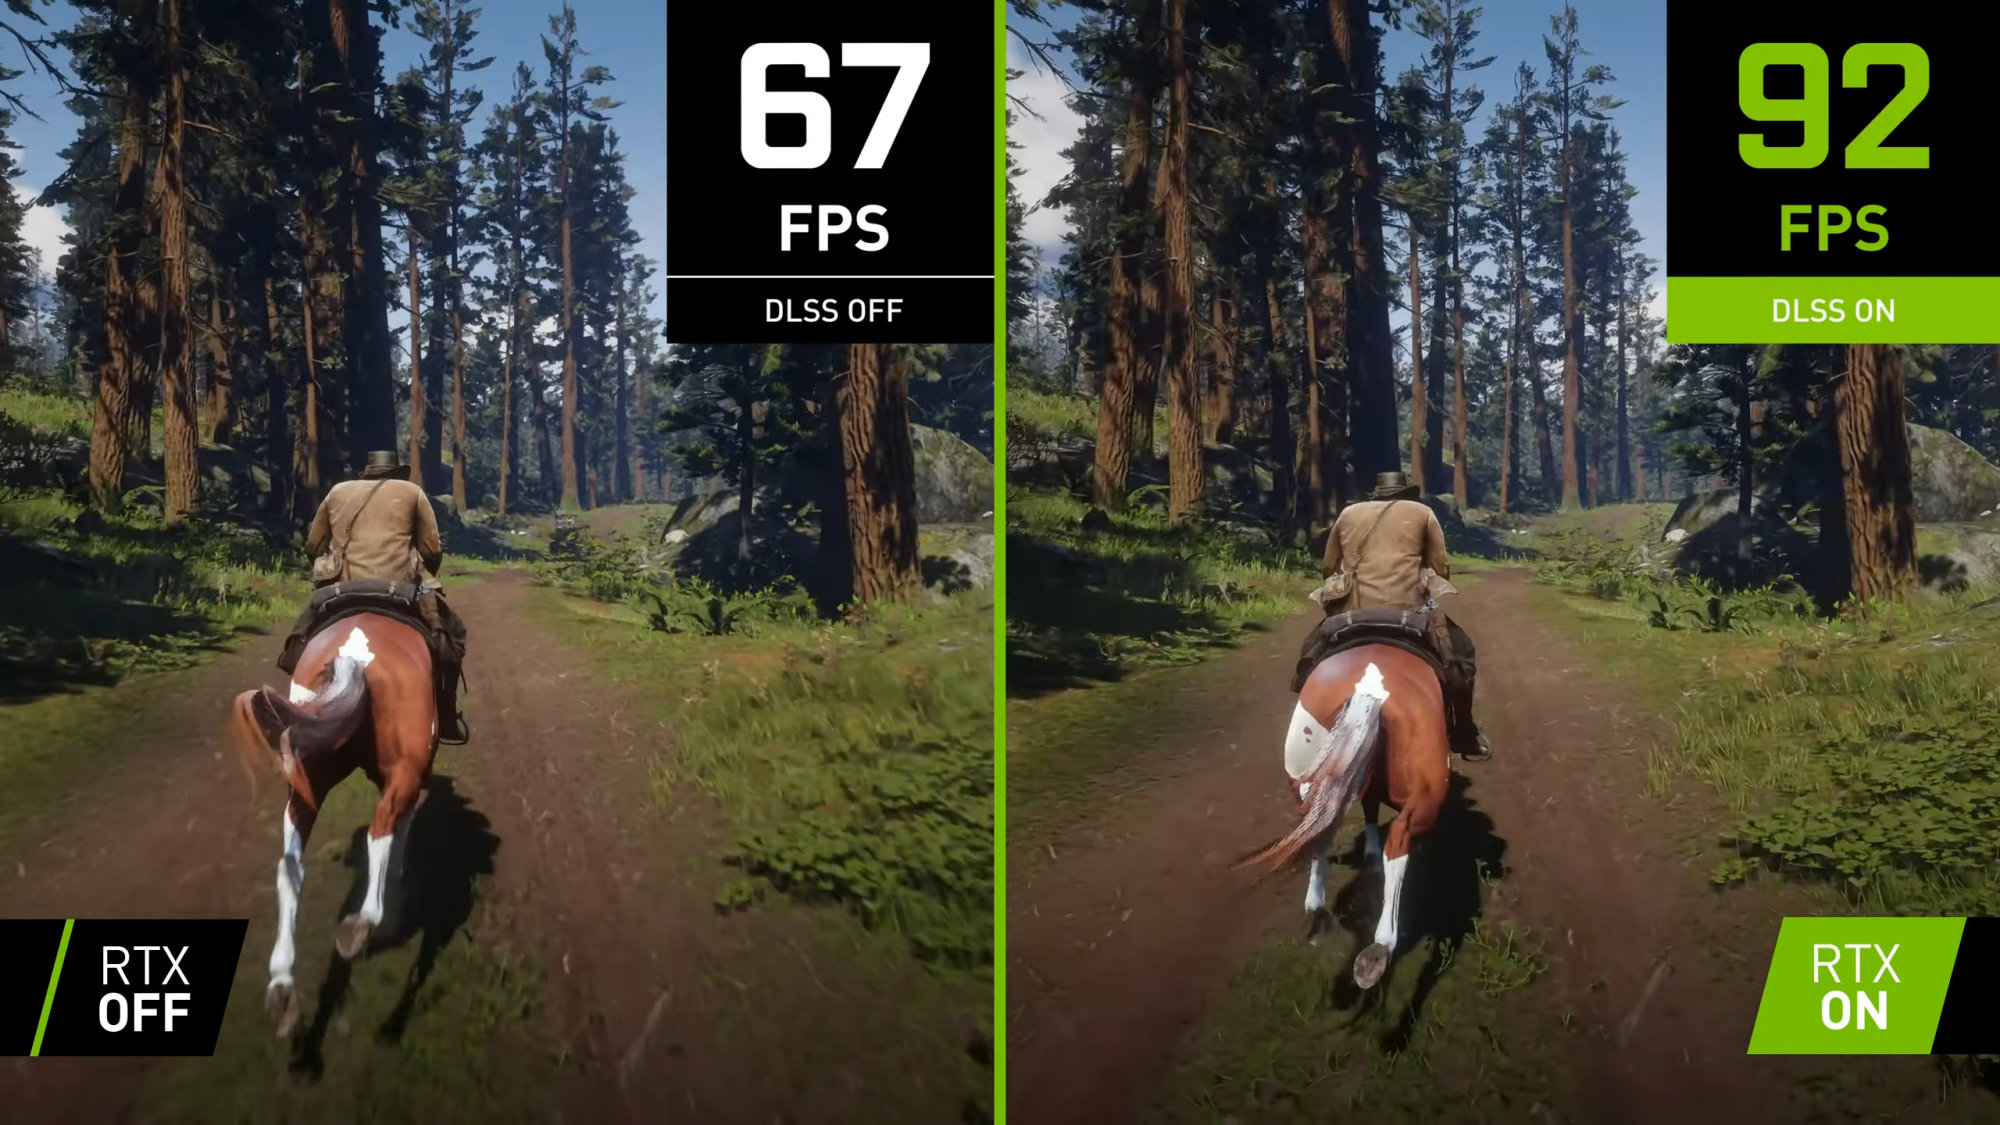 NVIDIA DLSS is now Red Dead Redemption 2 and Red Online, up to 45% higher performance at 4K - VideoCardz.com